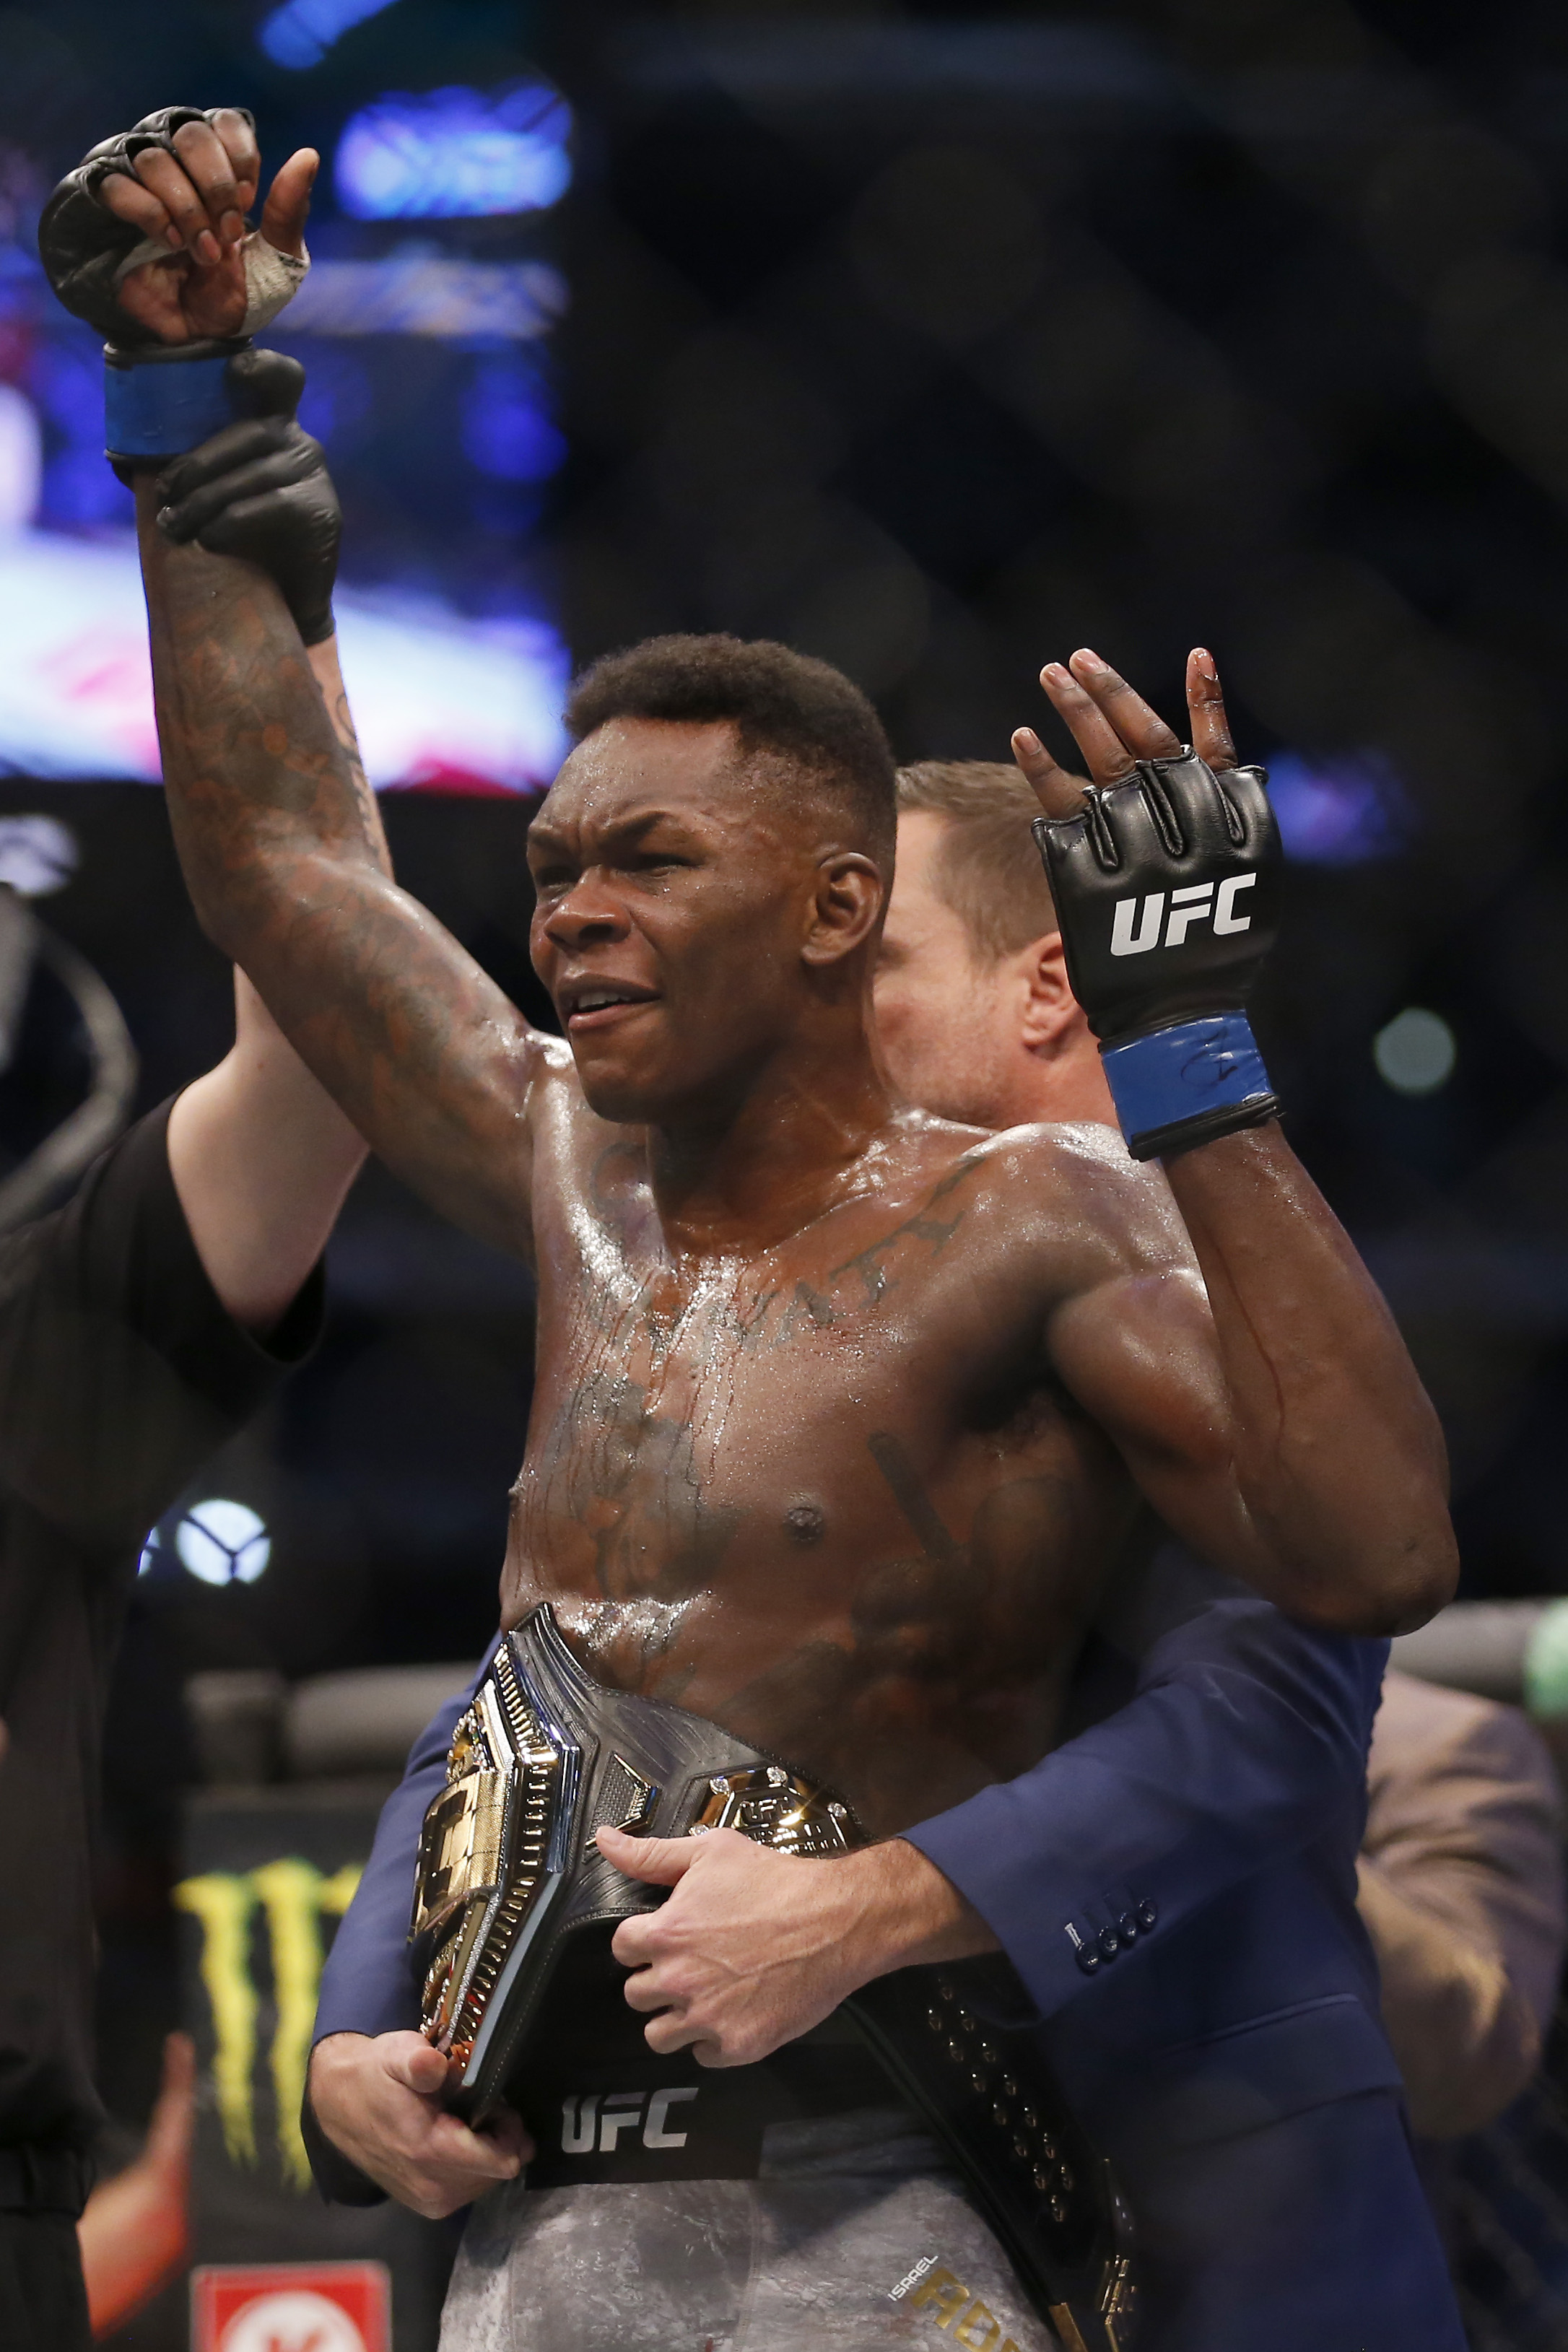 Israel Adesanya celebrates his victory over Robert Whittaker between in their Middleweight title bout during UFC 243 at Marvel Stadium on October 06, 2019 in Melbourne, Australia.